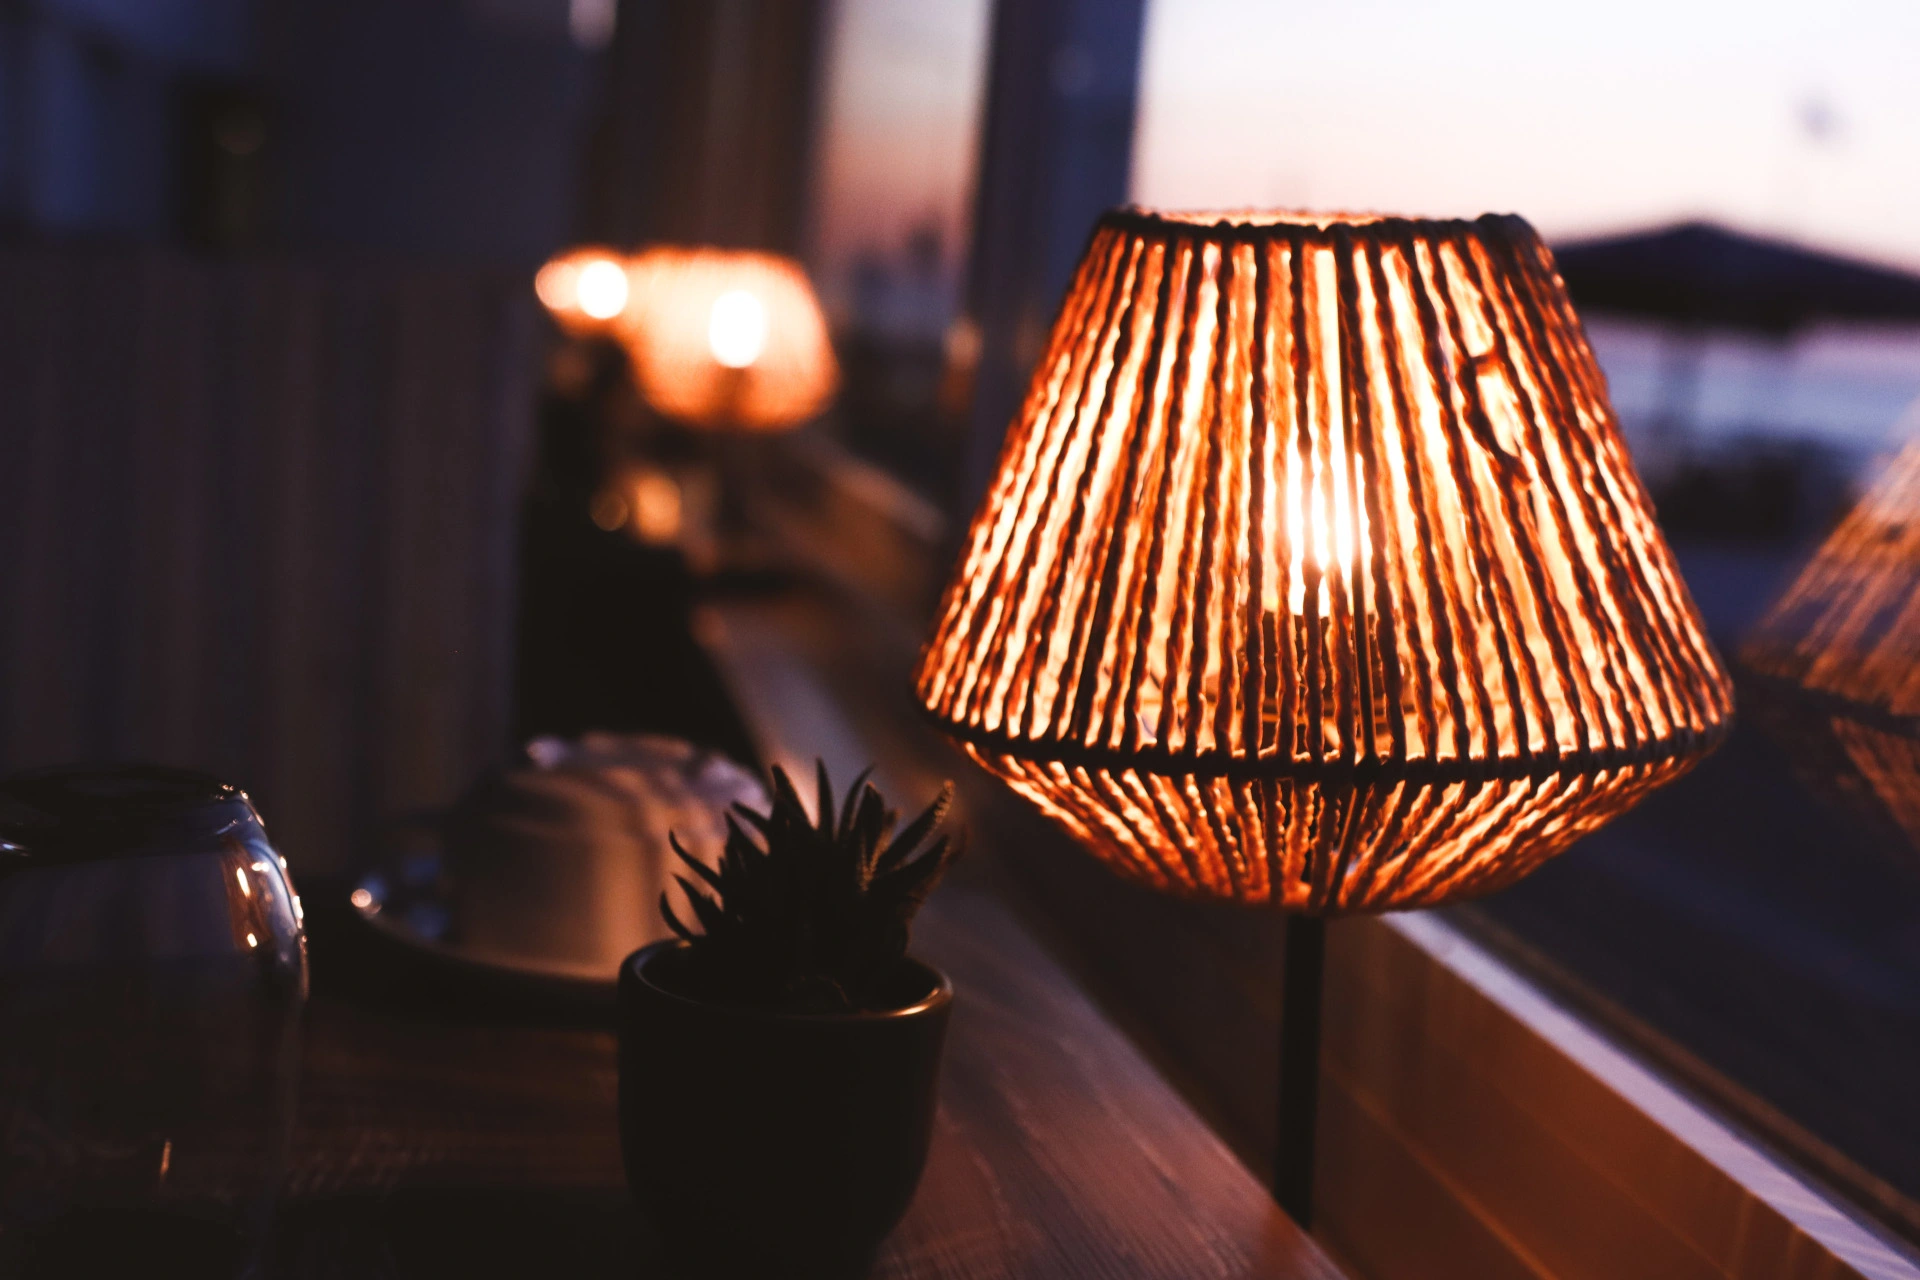 Image of a lamp facing the sunset